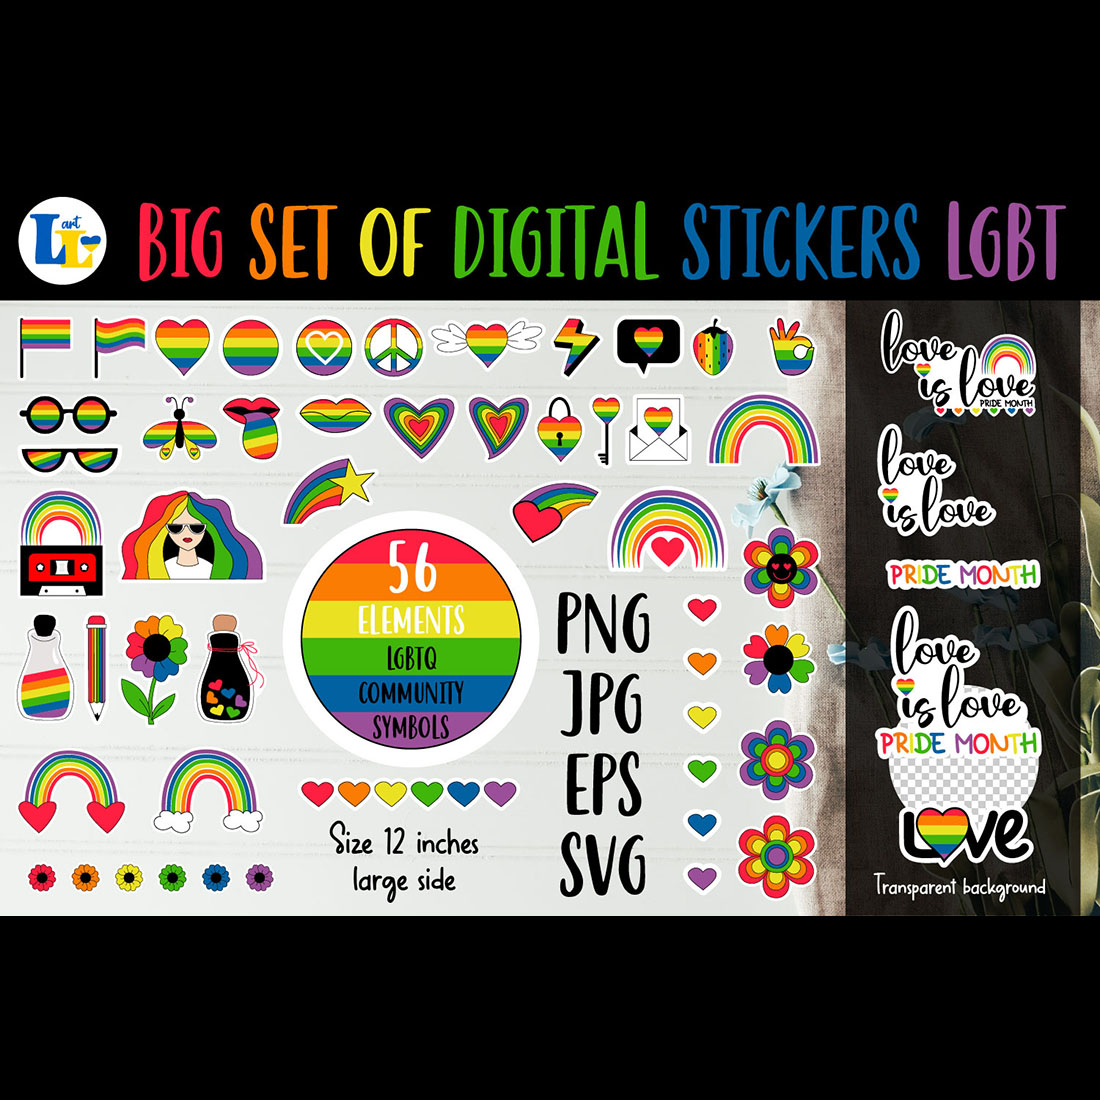 LGBTQ Community Symbols Daily Planner Digital Stickers Preview Image.